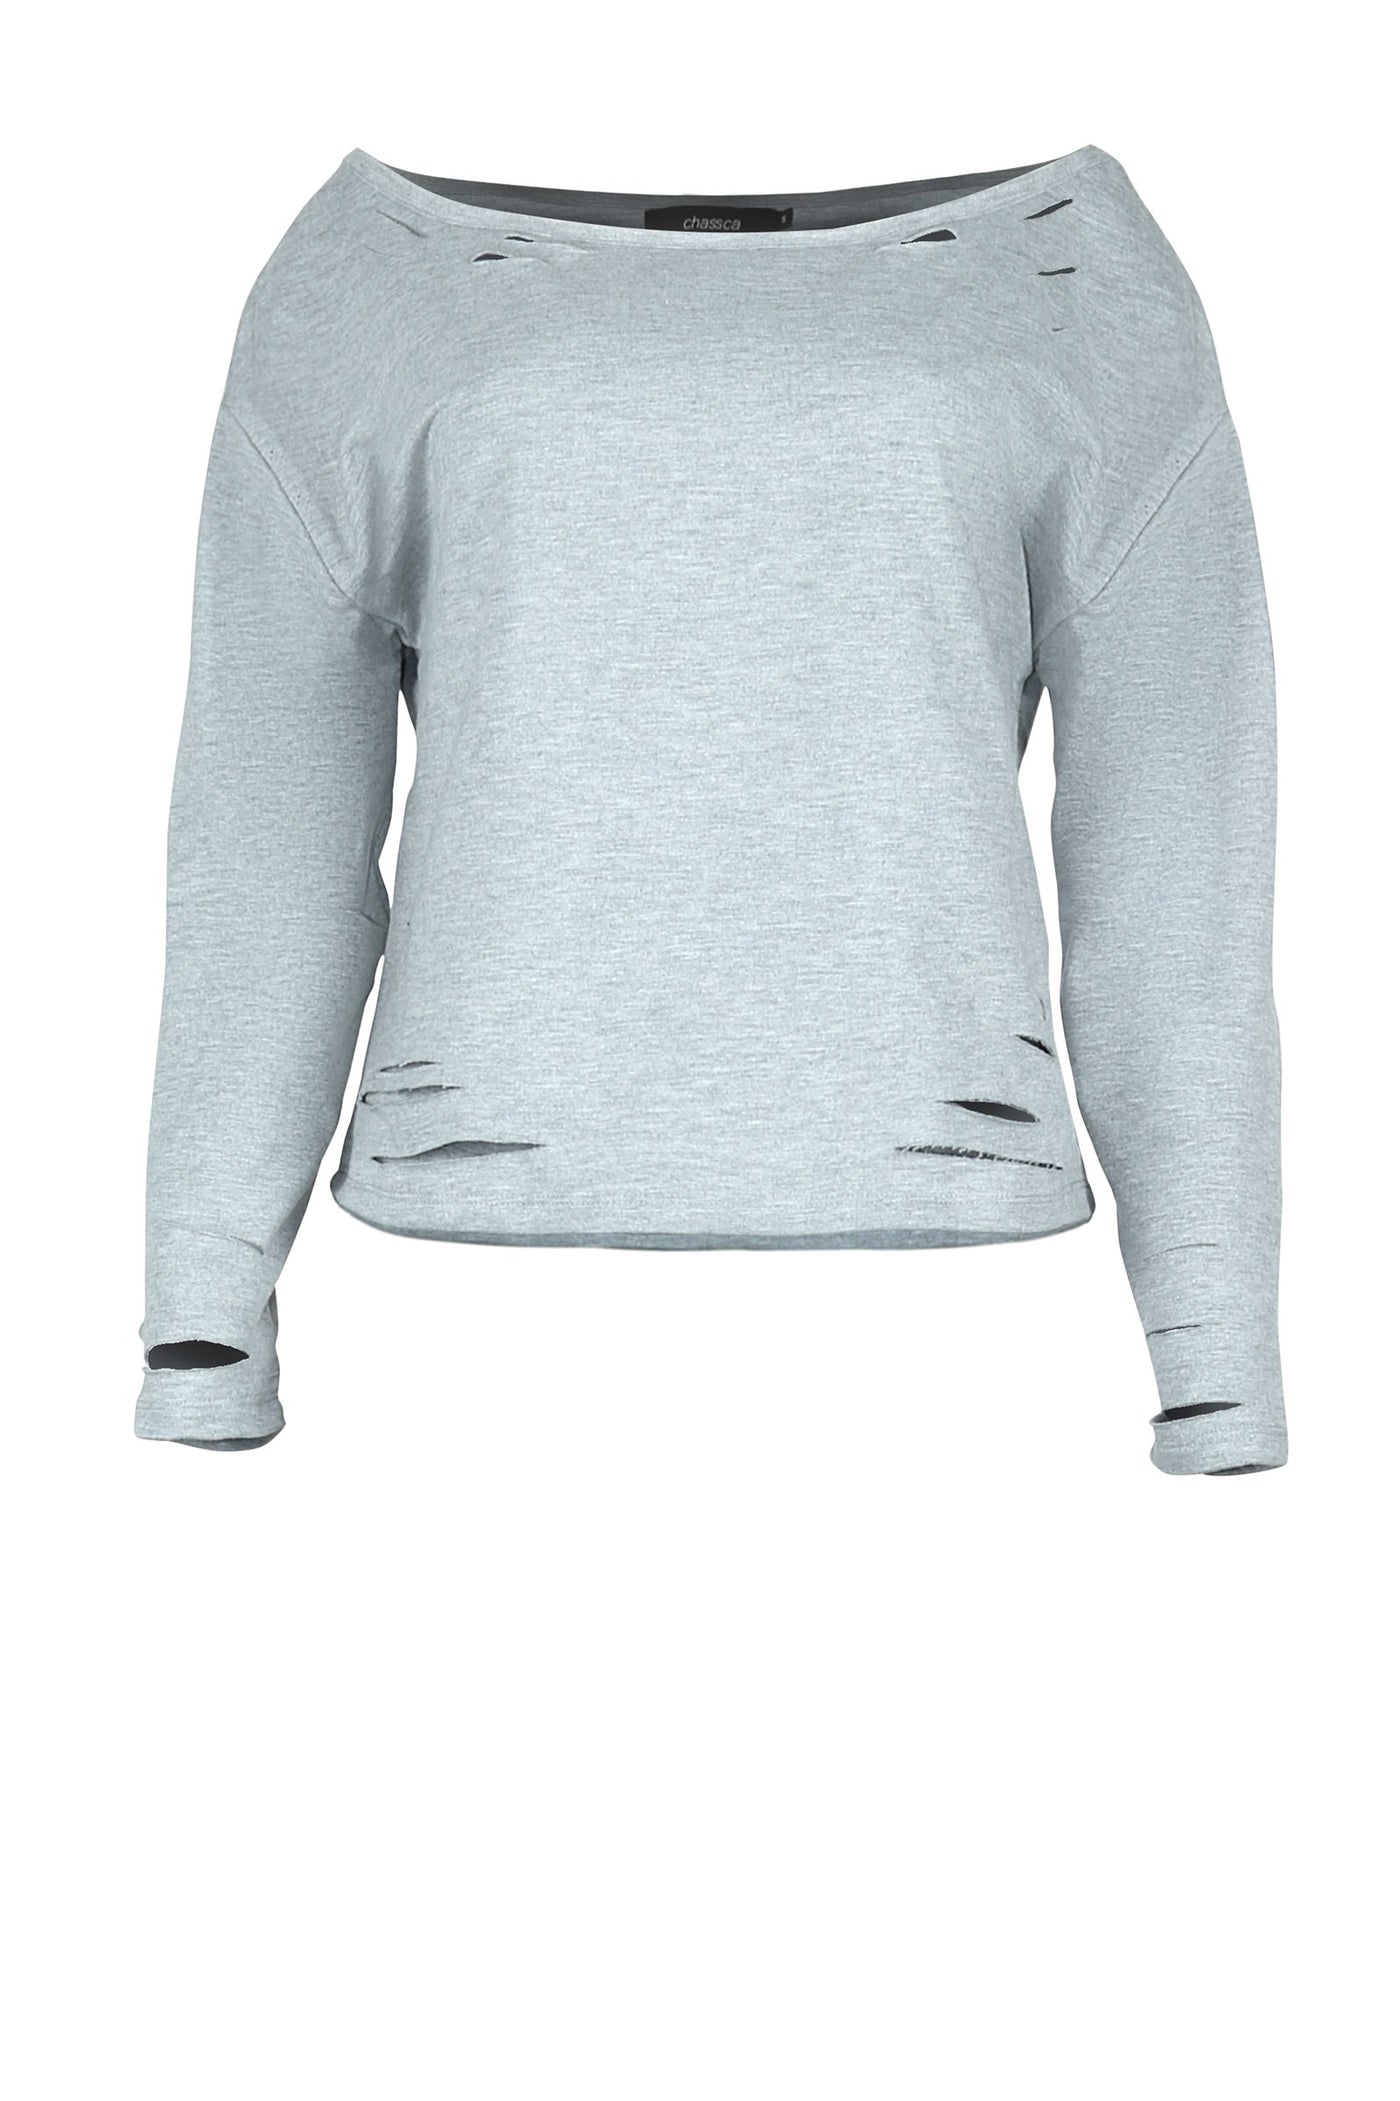 chassca cut out sweat shirt - Breakmood